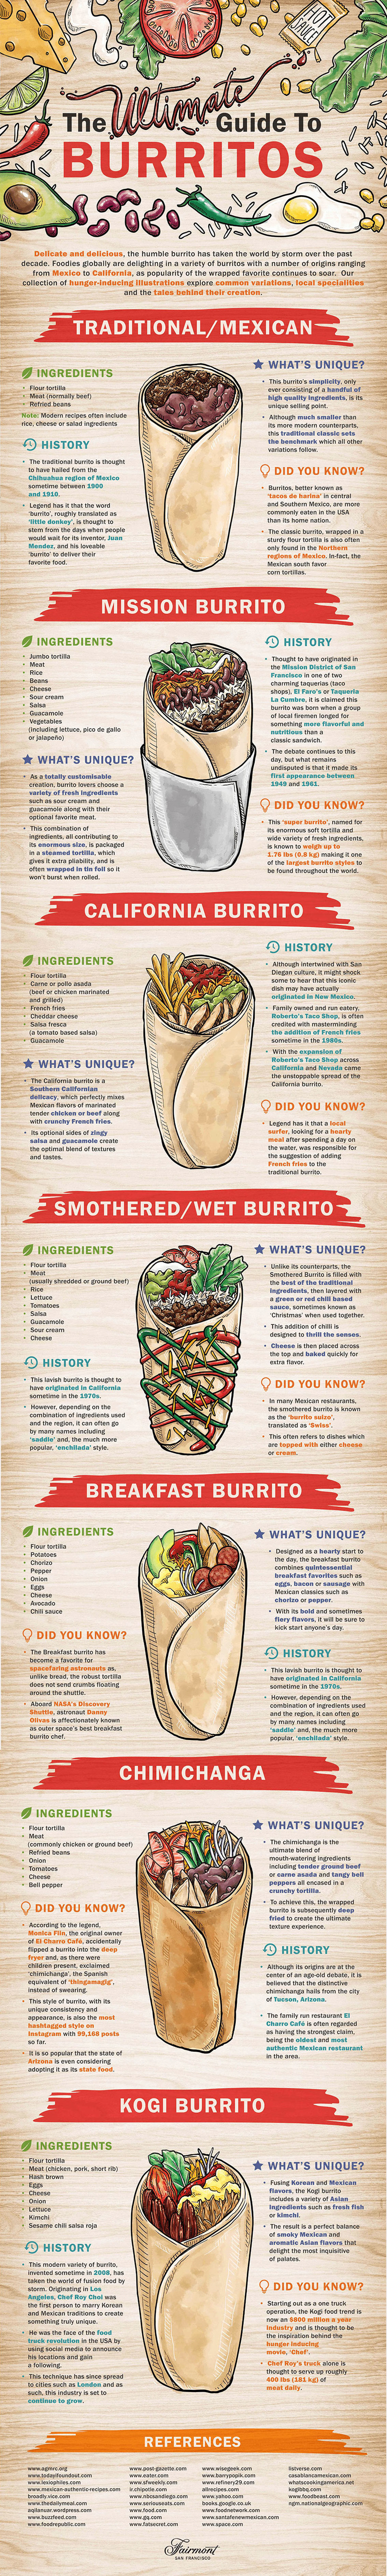 The Ultimate Guide to Burritos - Cooking Infographic